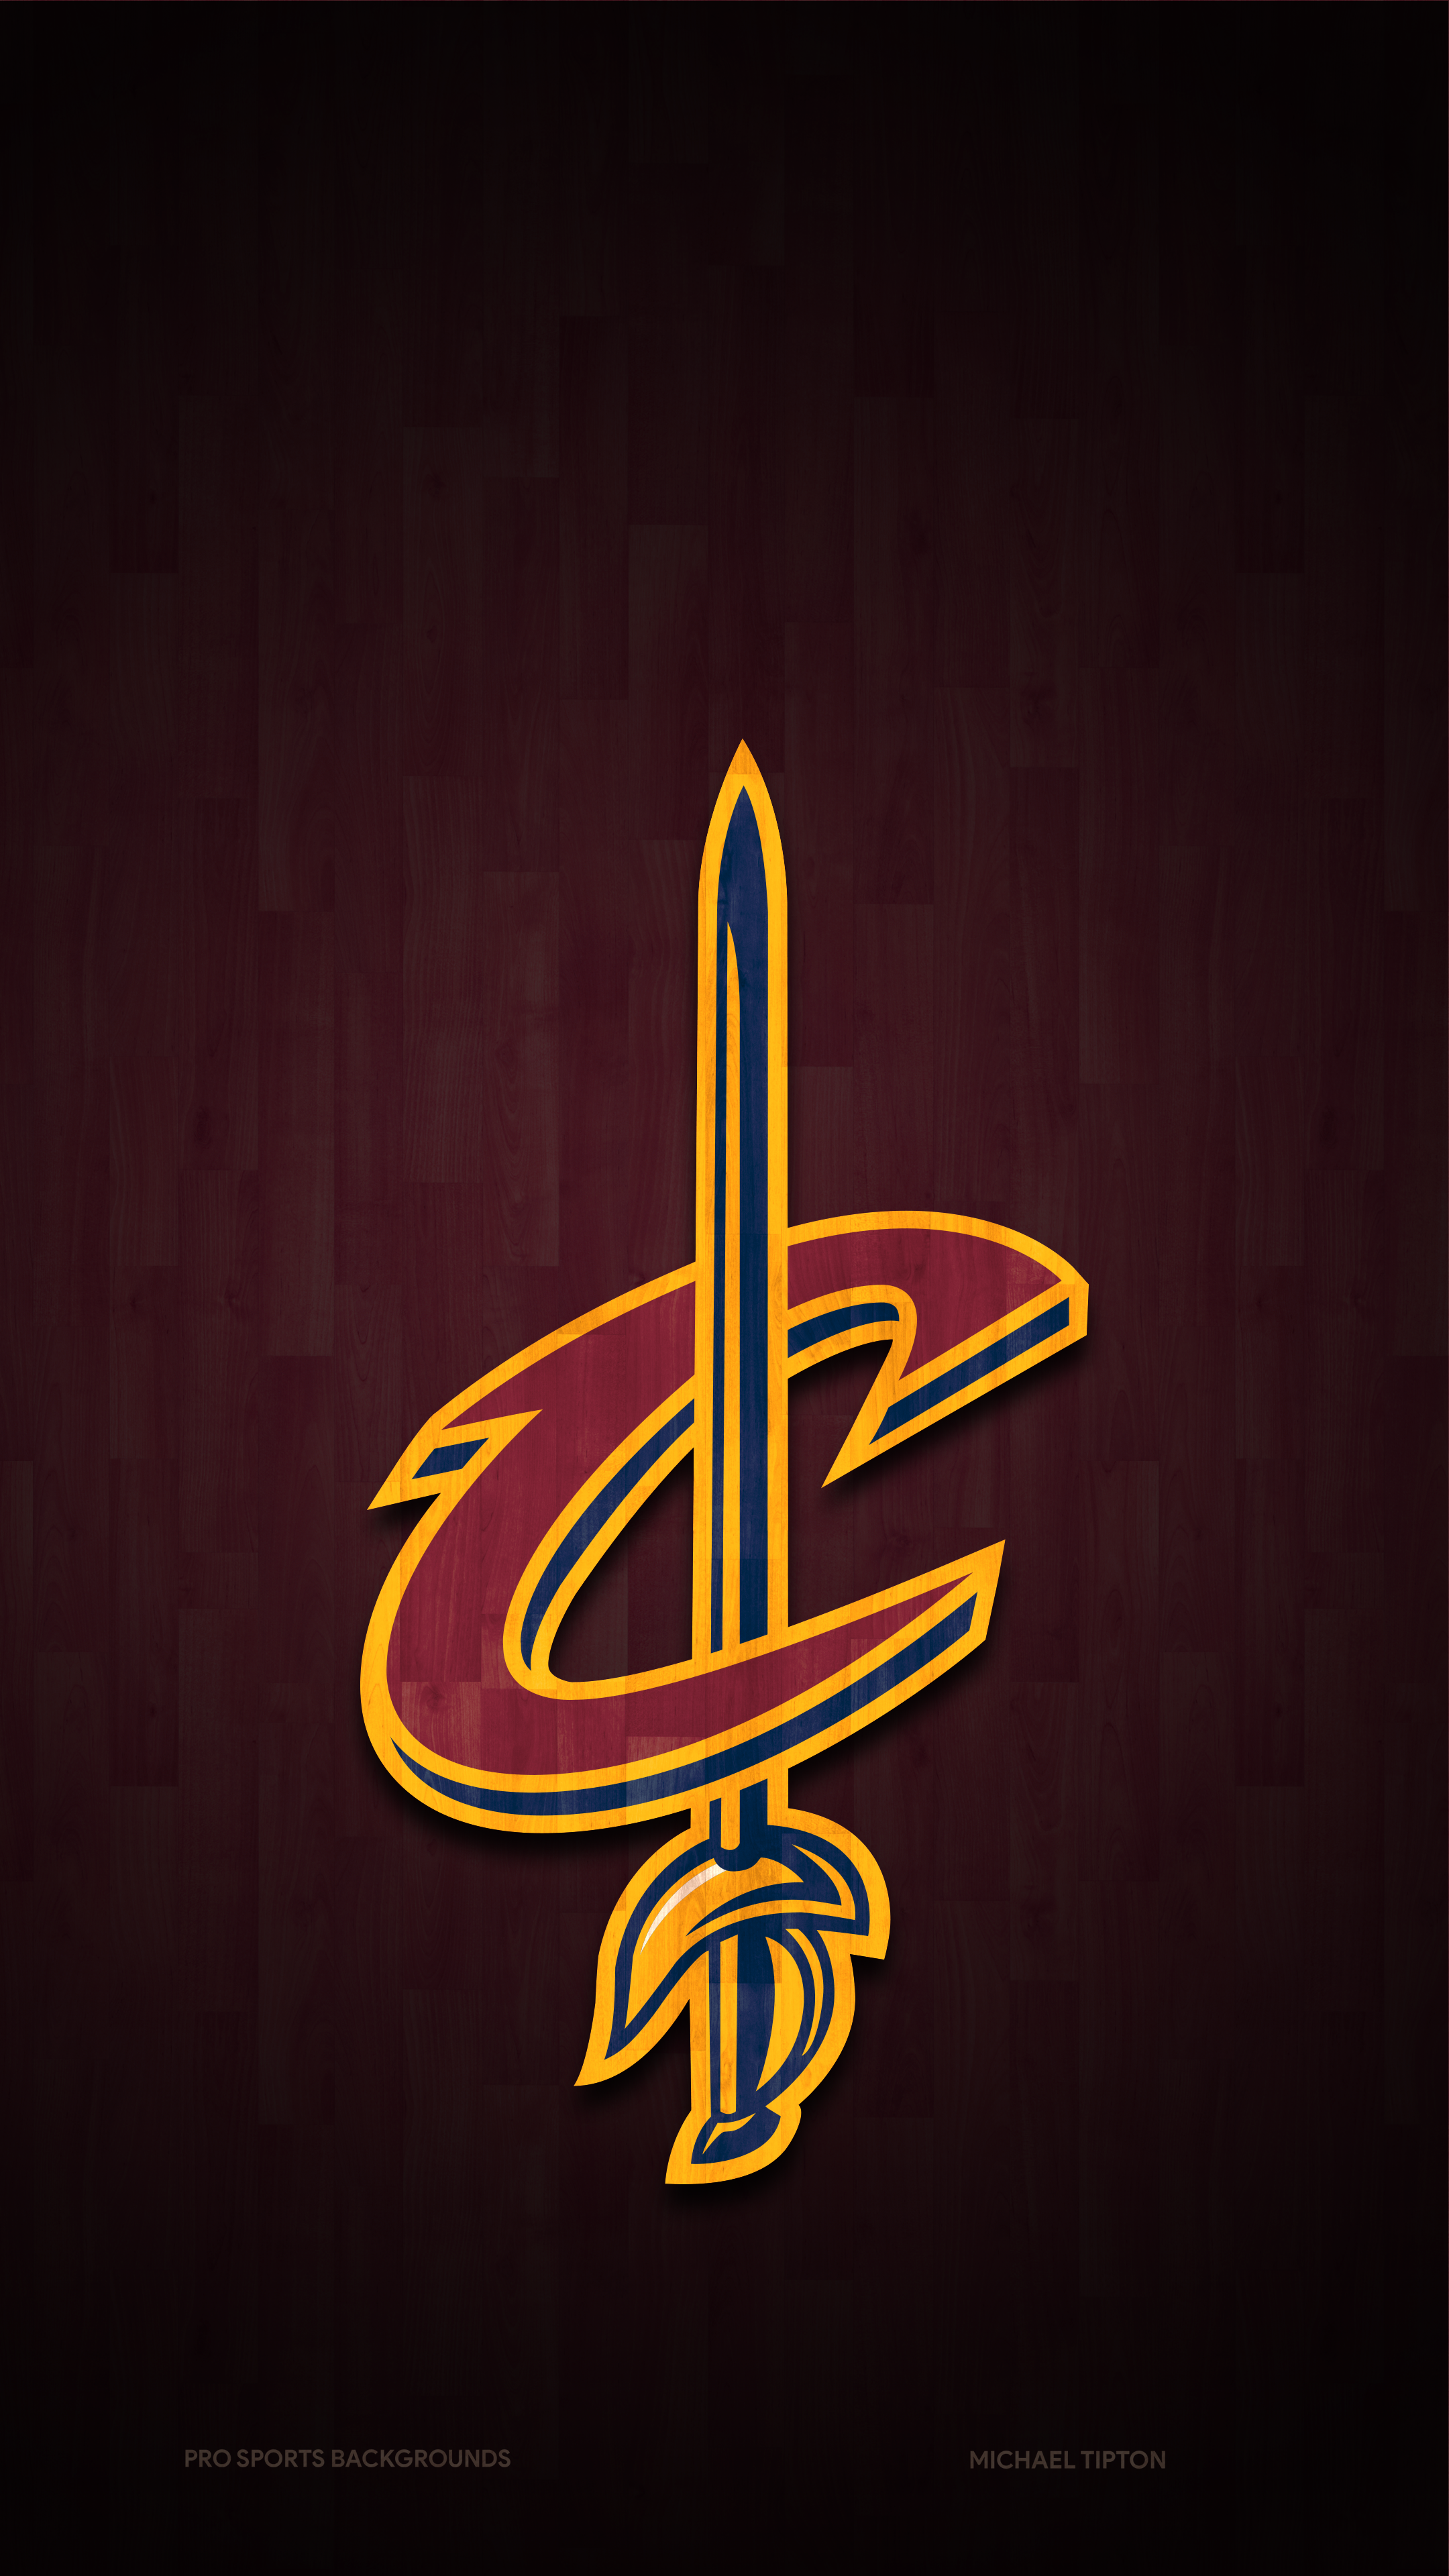 100+] Cleveland Cavaliers Wallpapers